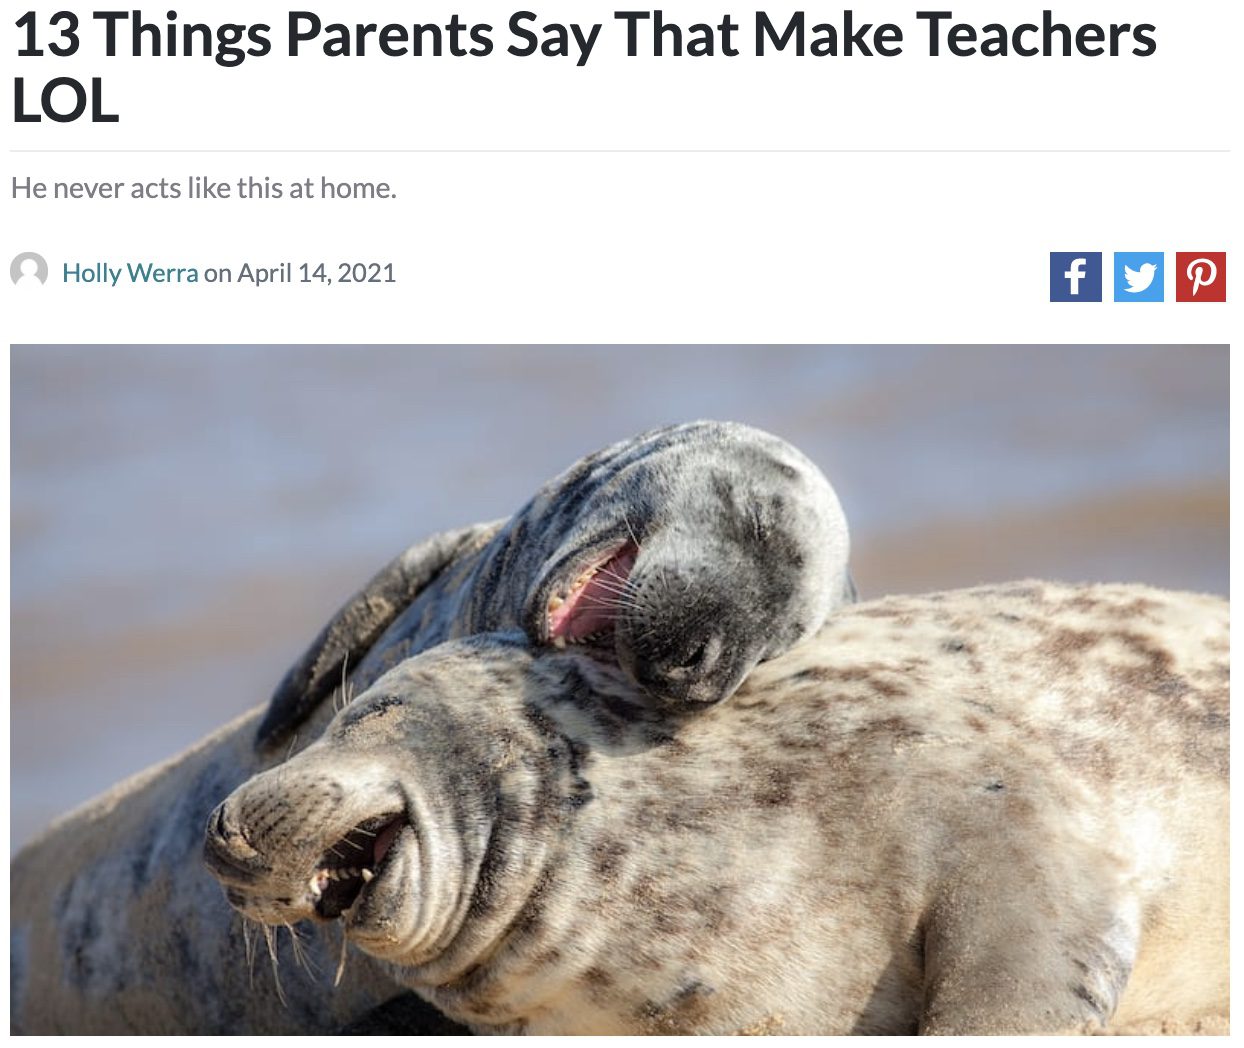 Screencap of an article about things parents say to teachers